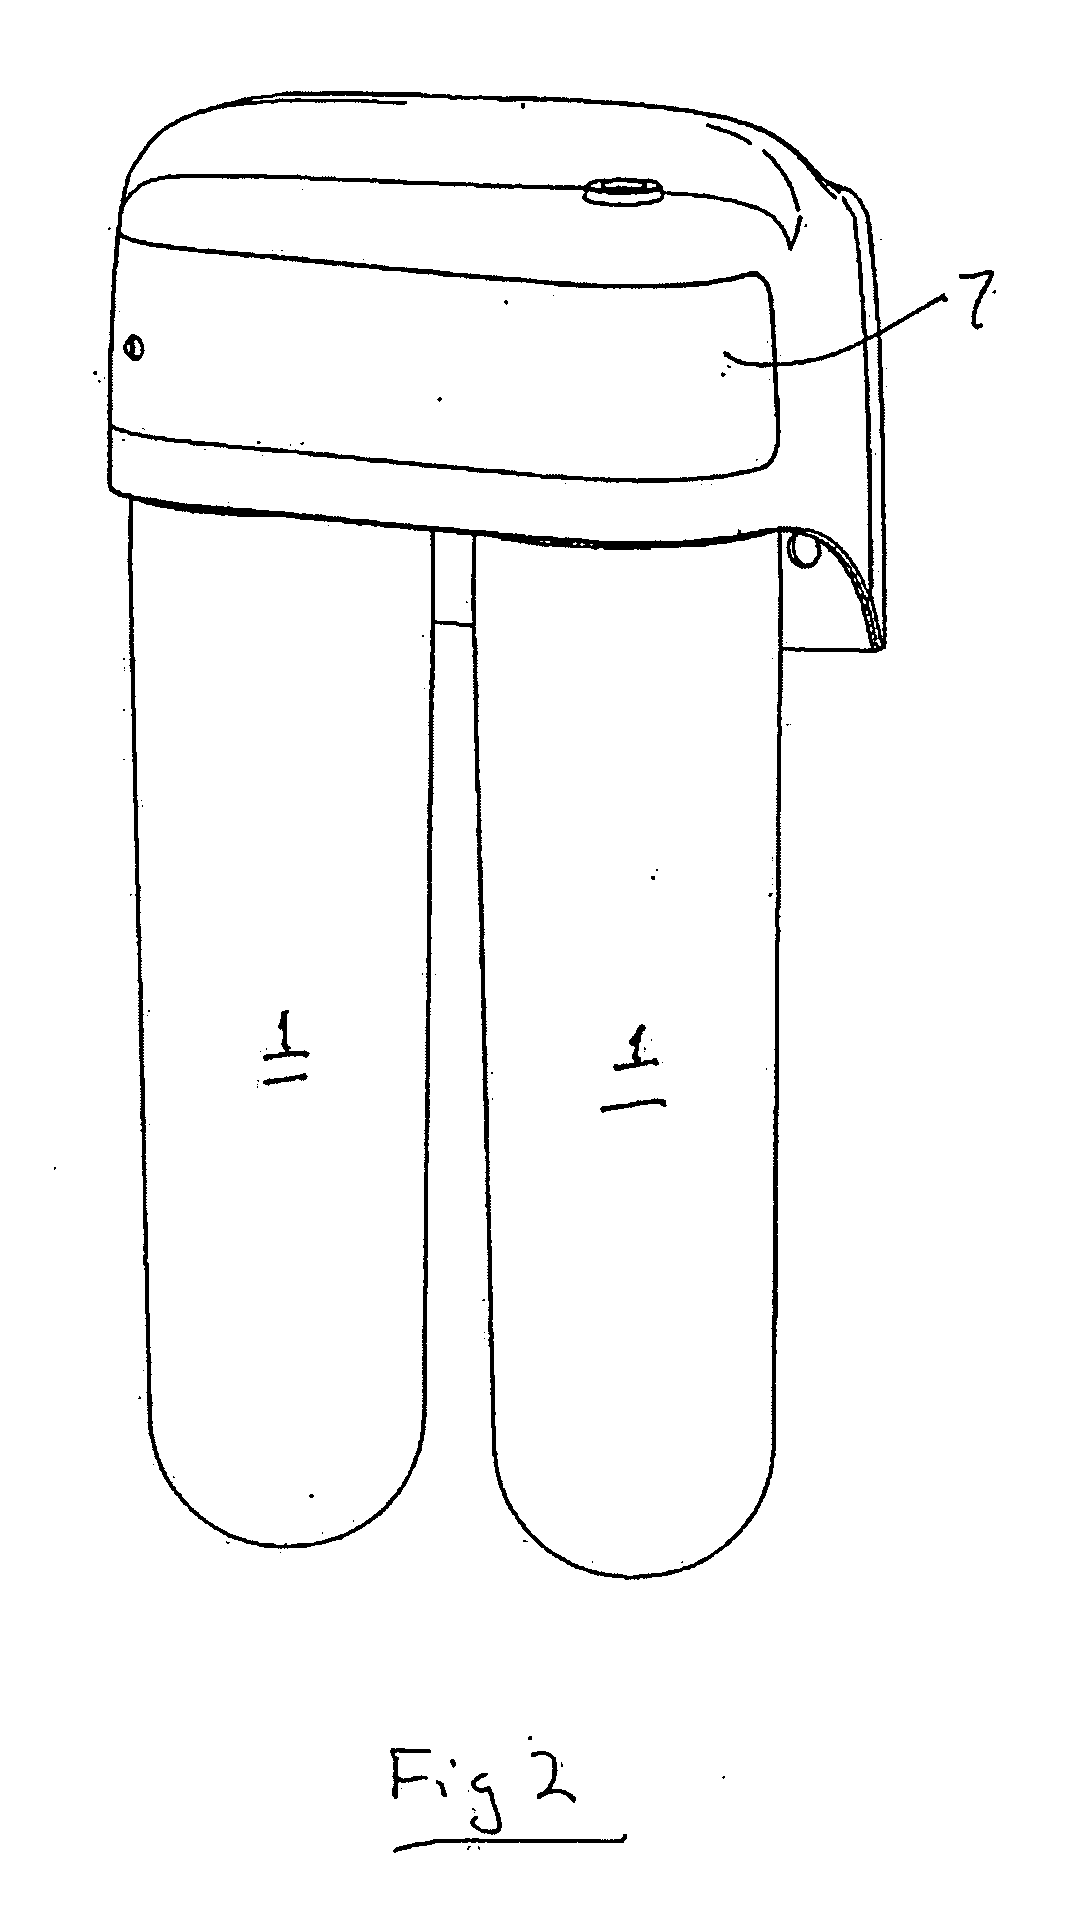 Filter cartridge for use with a filter head assembly